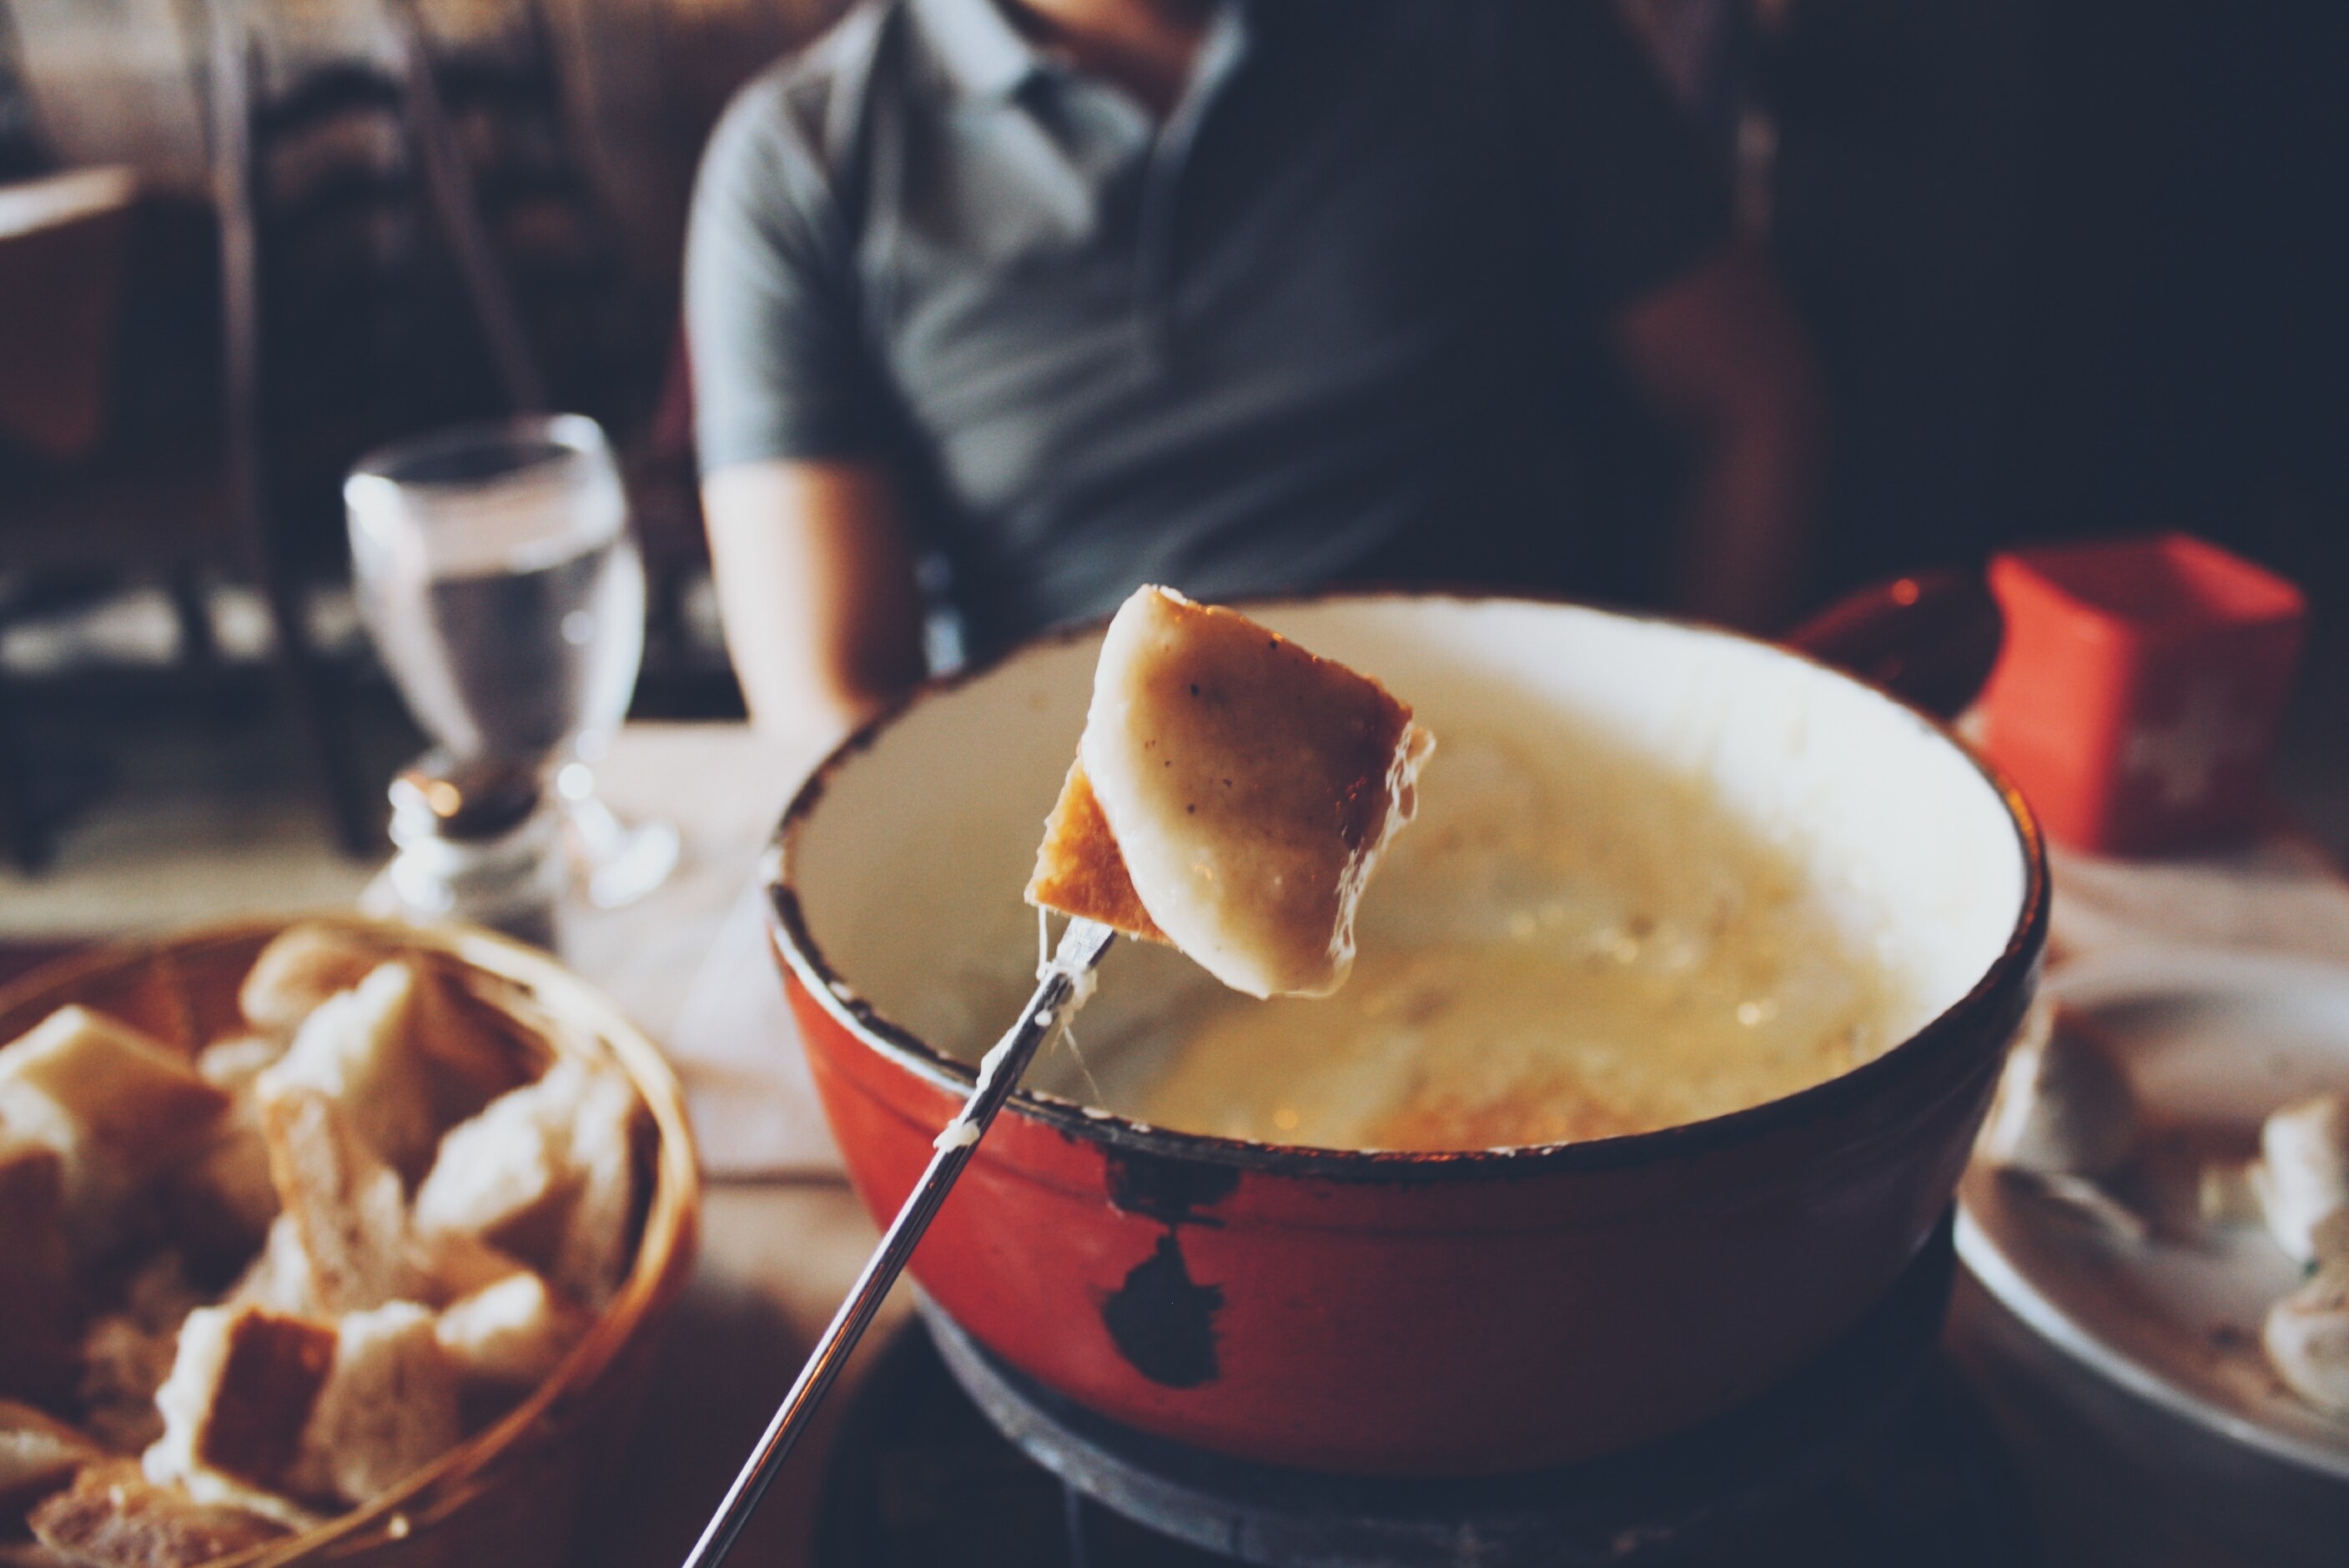 Bread that was dipped in cheese fondue